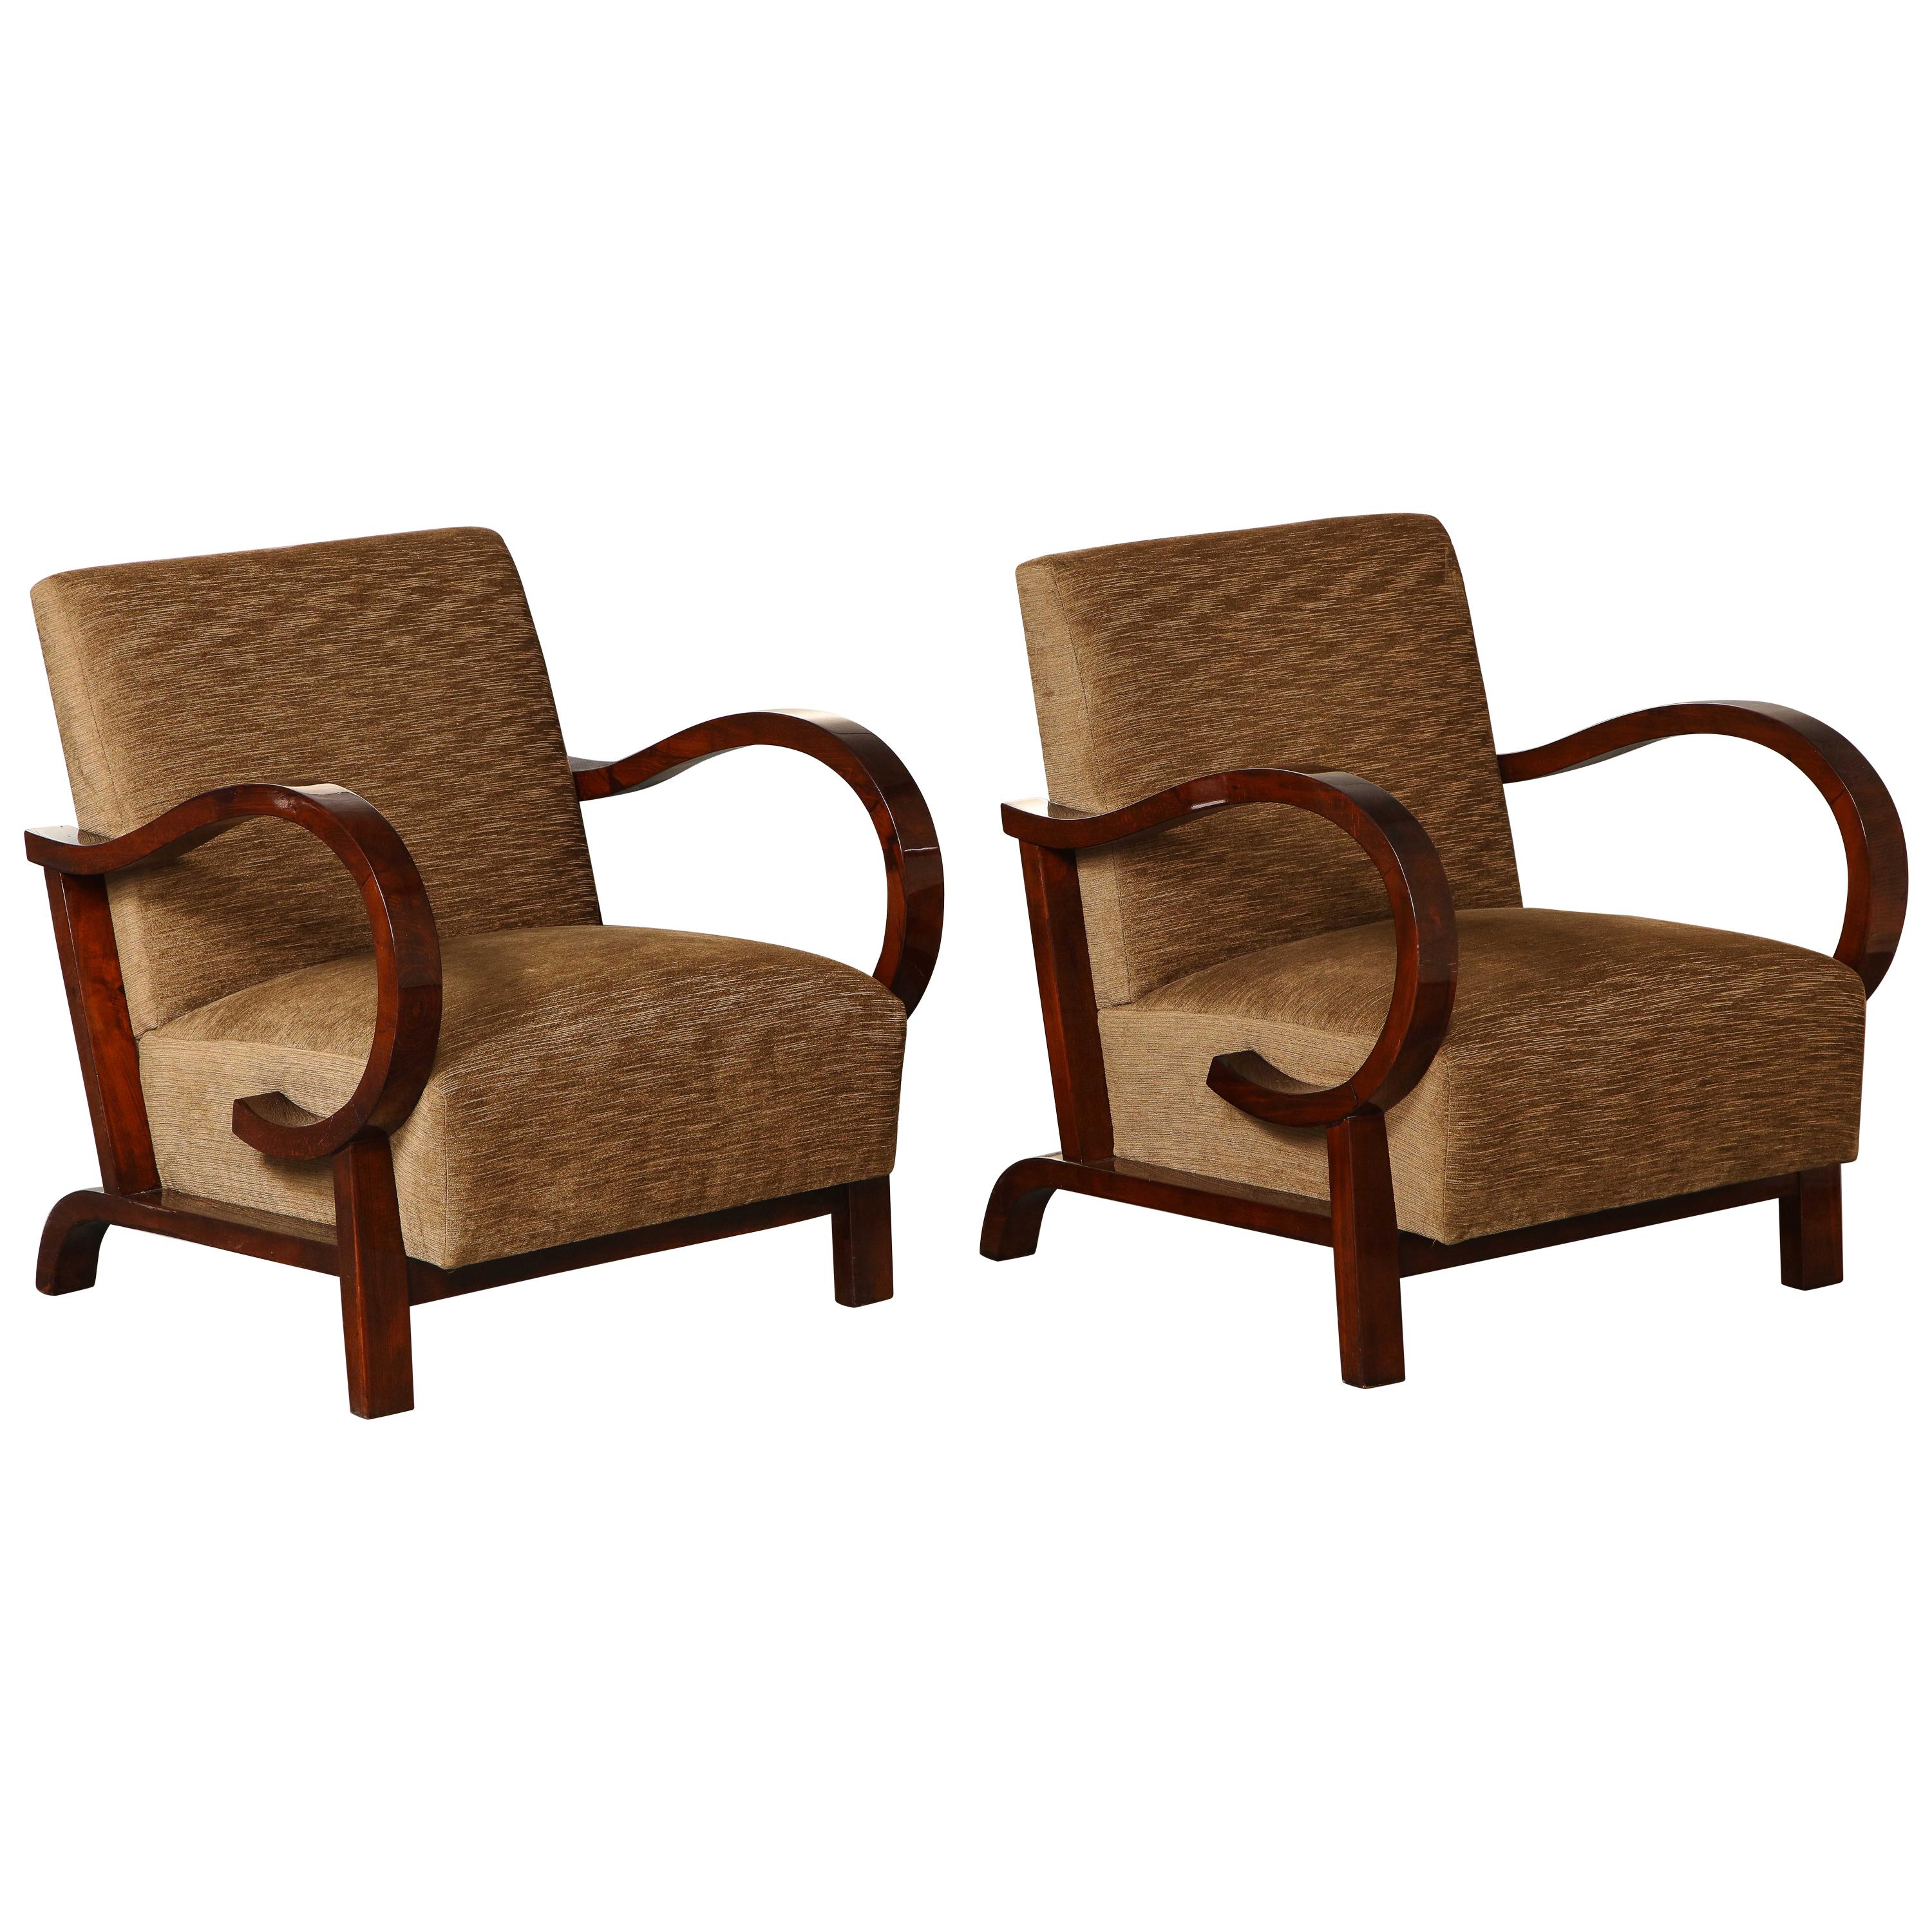 Pair of Art Deco Upholstered Armchairs